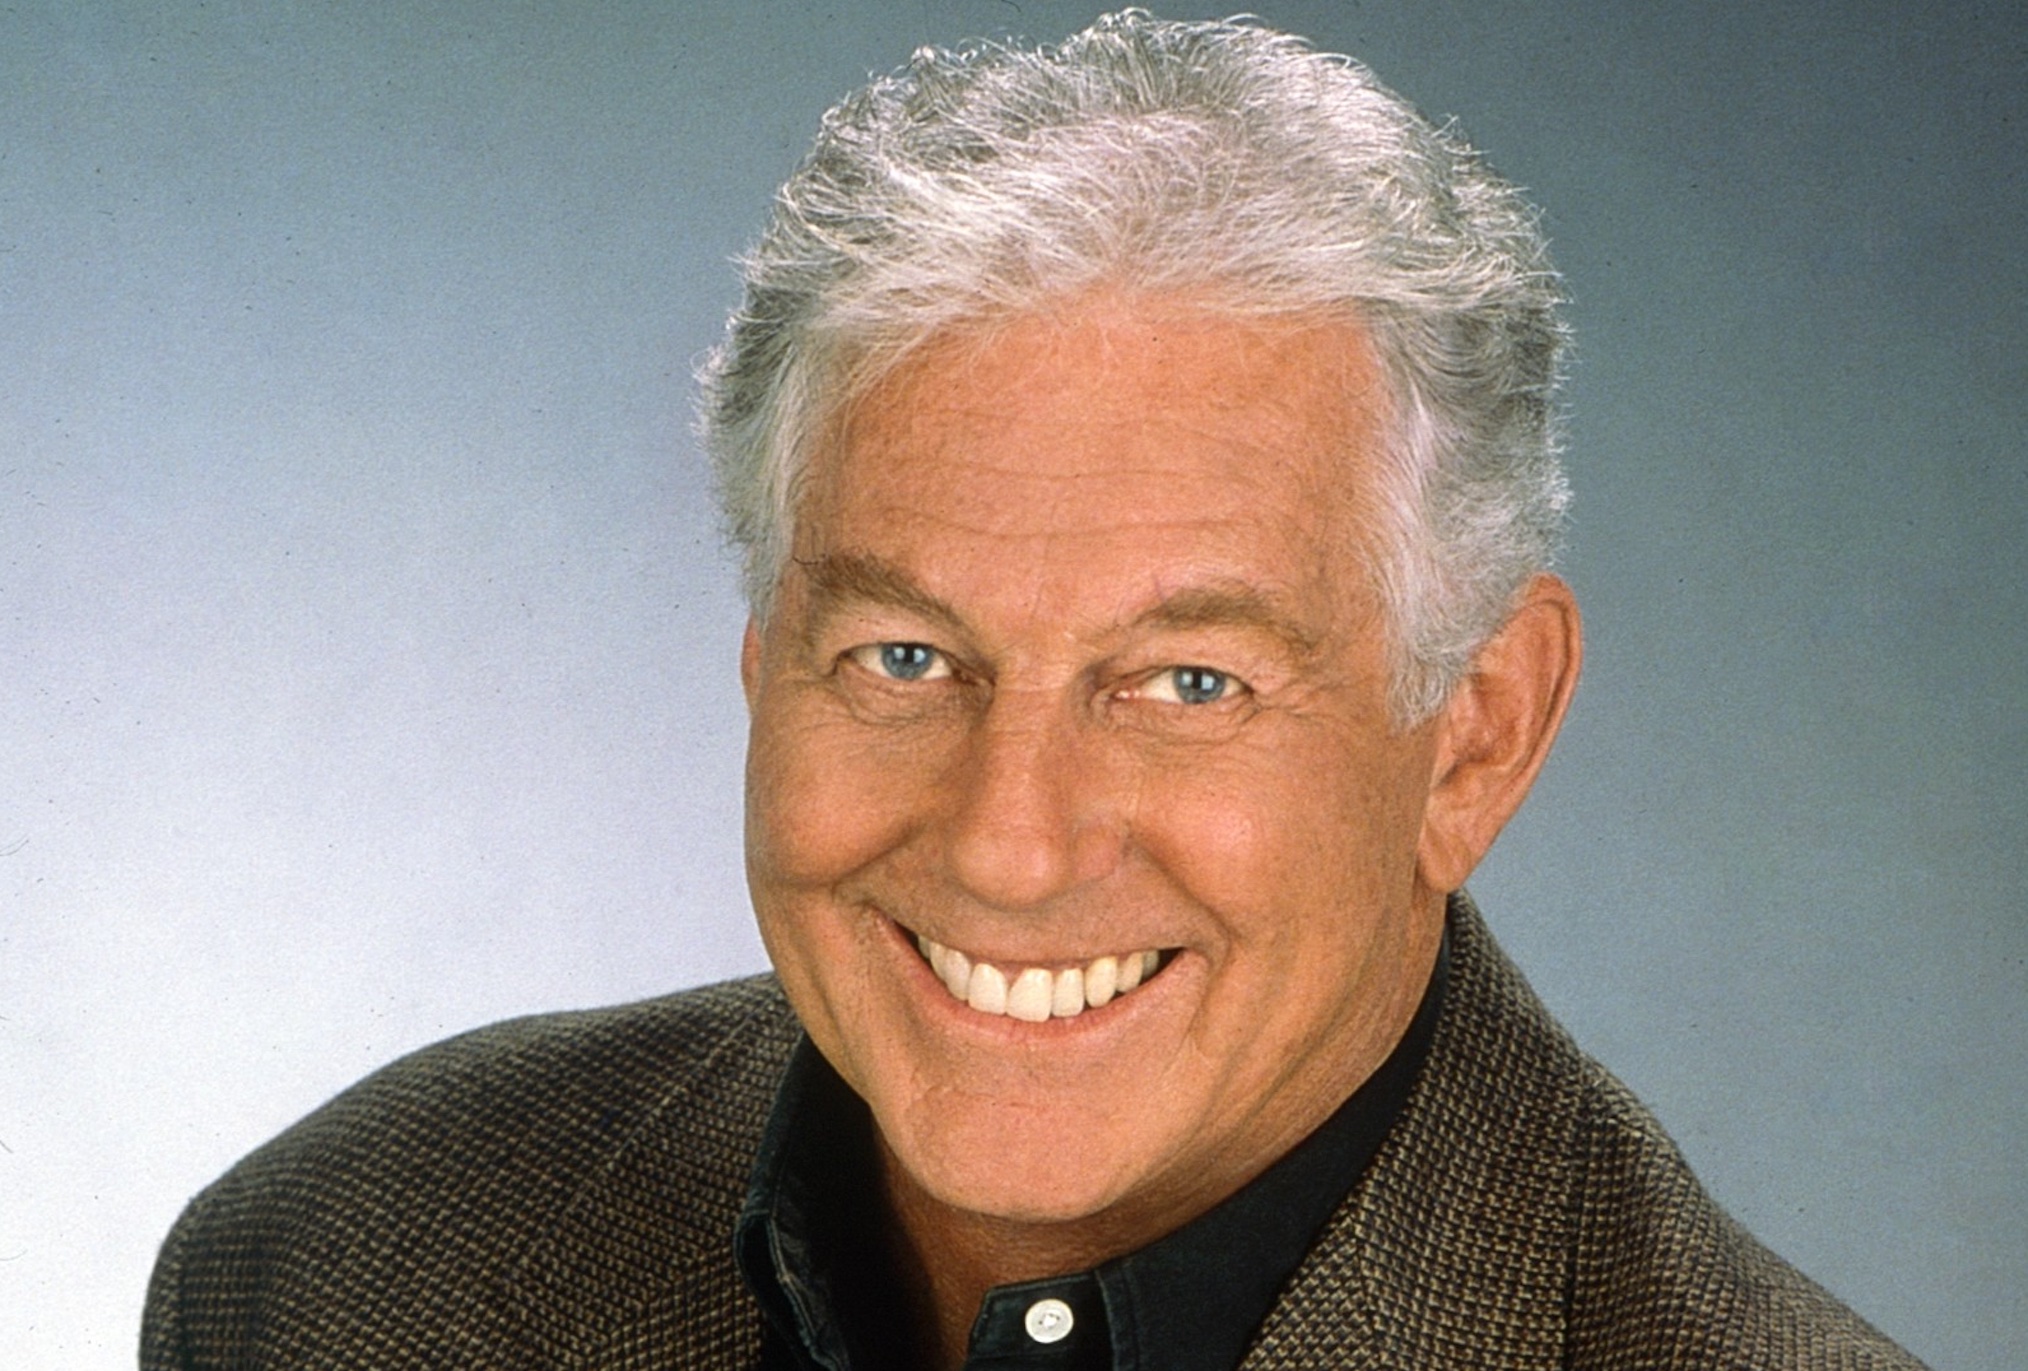 the “young and the restless” star was 92 years old